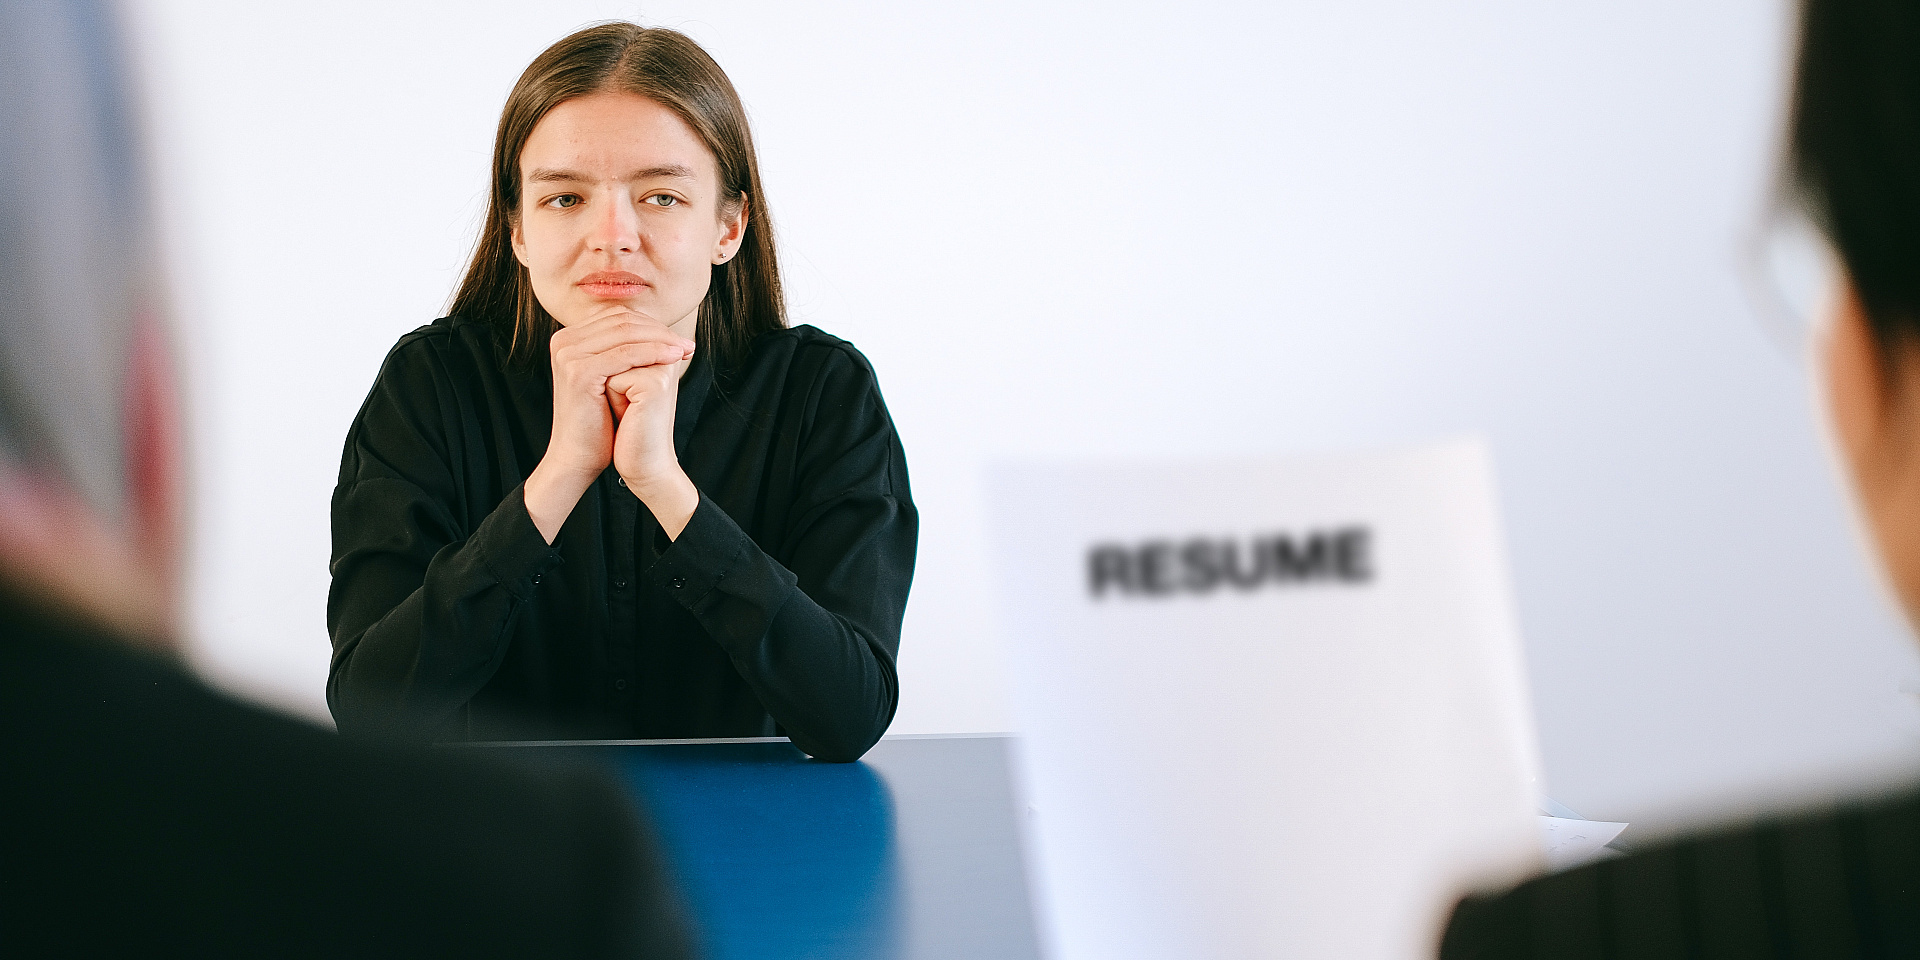 Woman waiting as two individuals read a paper with the word "Resume" on it.